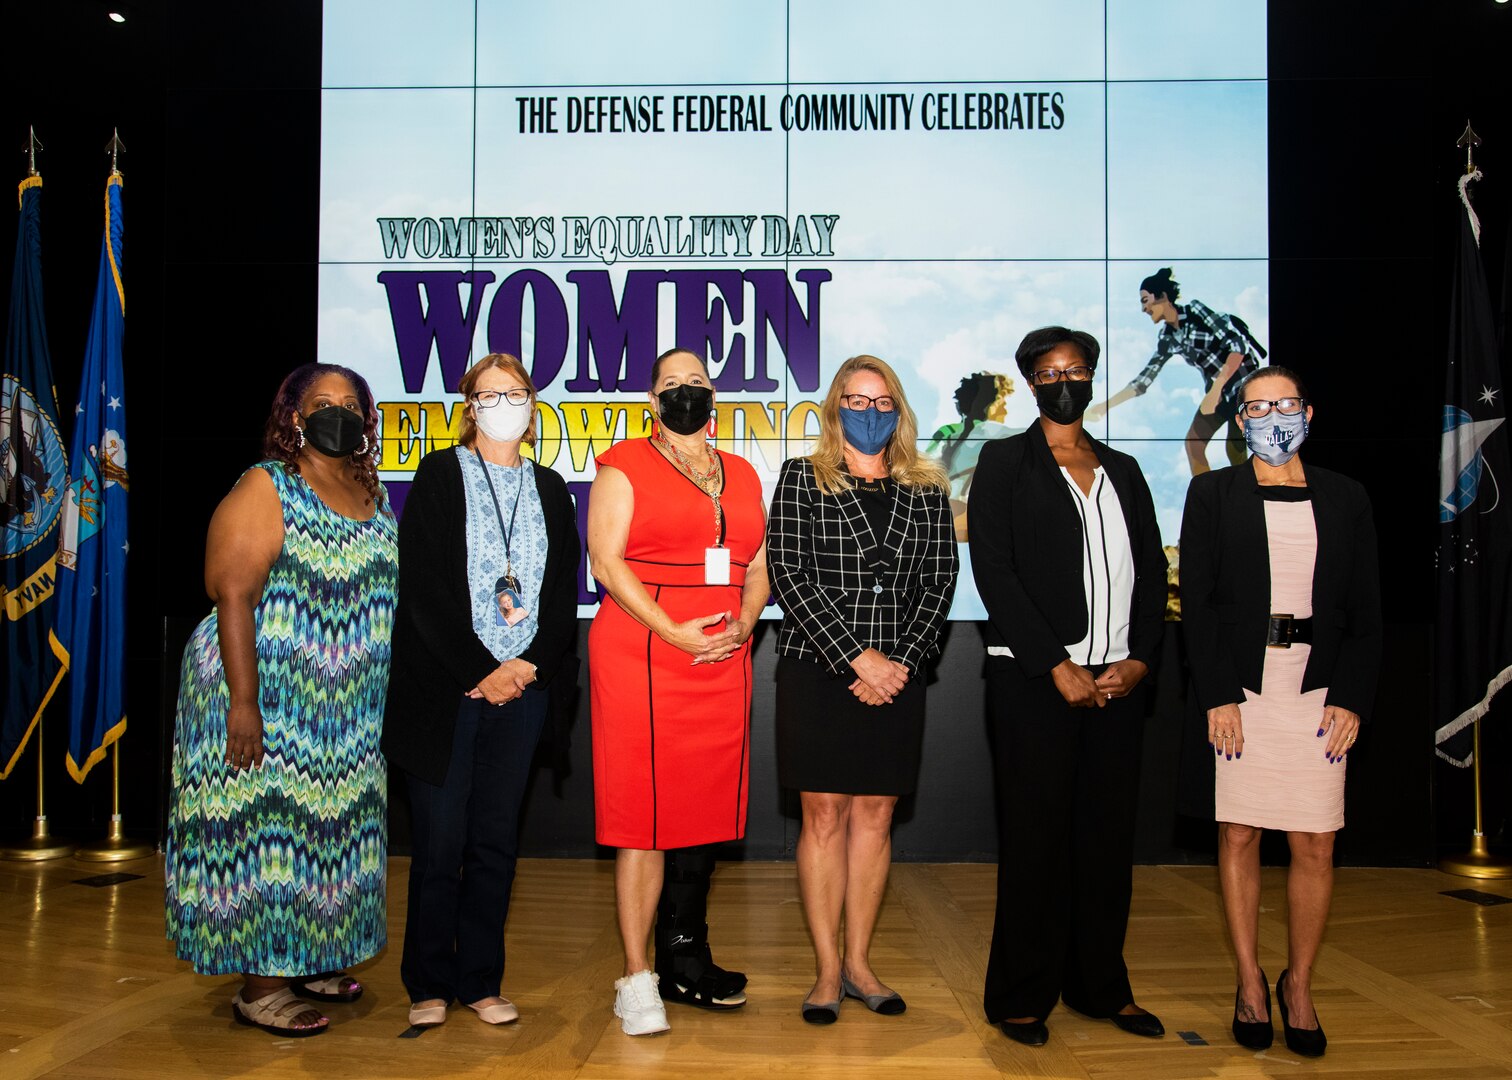 Six women stand on stage with masks on. A heavyset  African American woman in a patterned dress, a woman with red hair and glasses wearing a black suit and blue blouse, a African American woman with black hair pulled back in a red dress in a walking boot, a woman with blond hair and glasses wearing a checkered suit jacket and black skirt, a African American woman with short black hair in a black suit with a white blouse and a woman in glasses and dark hair pulled back in a bun wearing a pink and black dress with a black jacket.